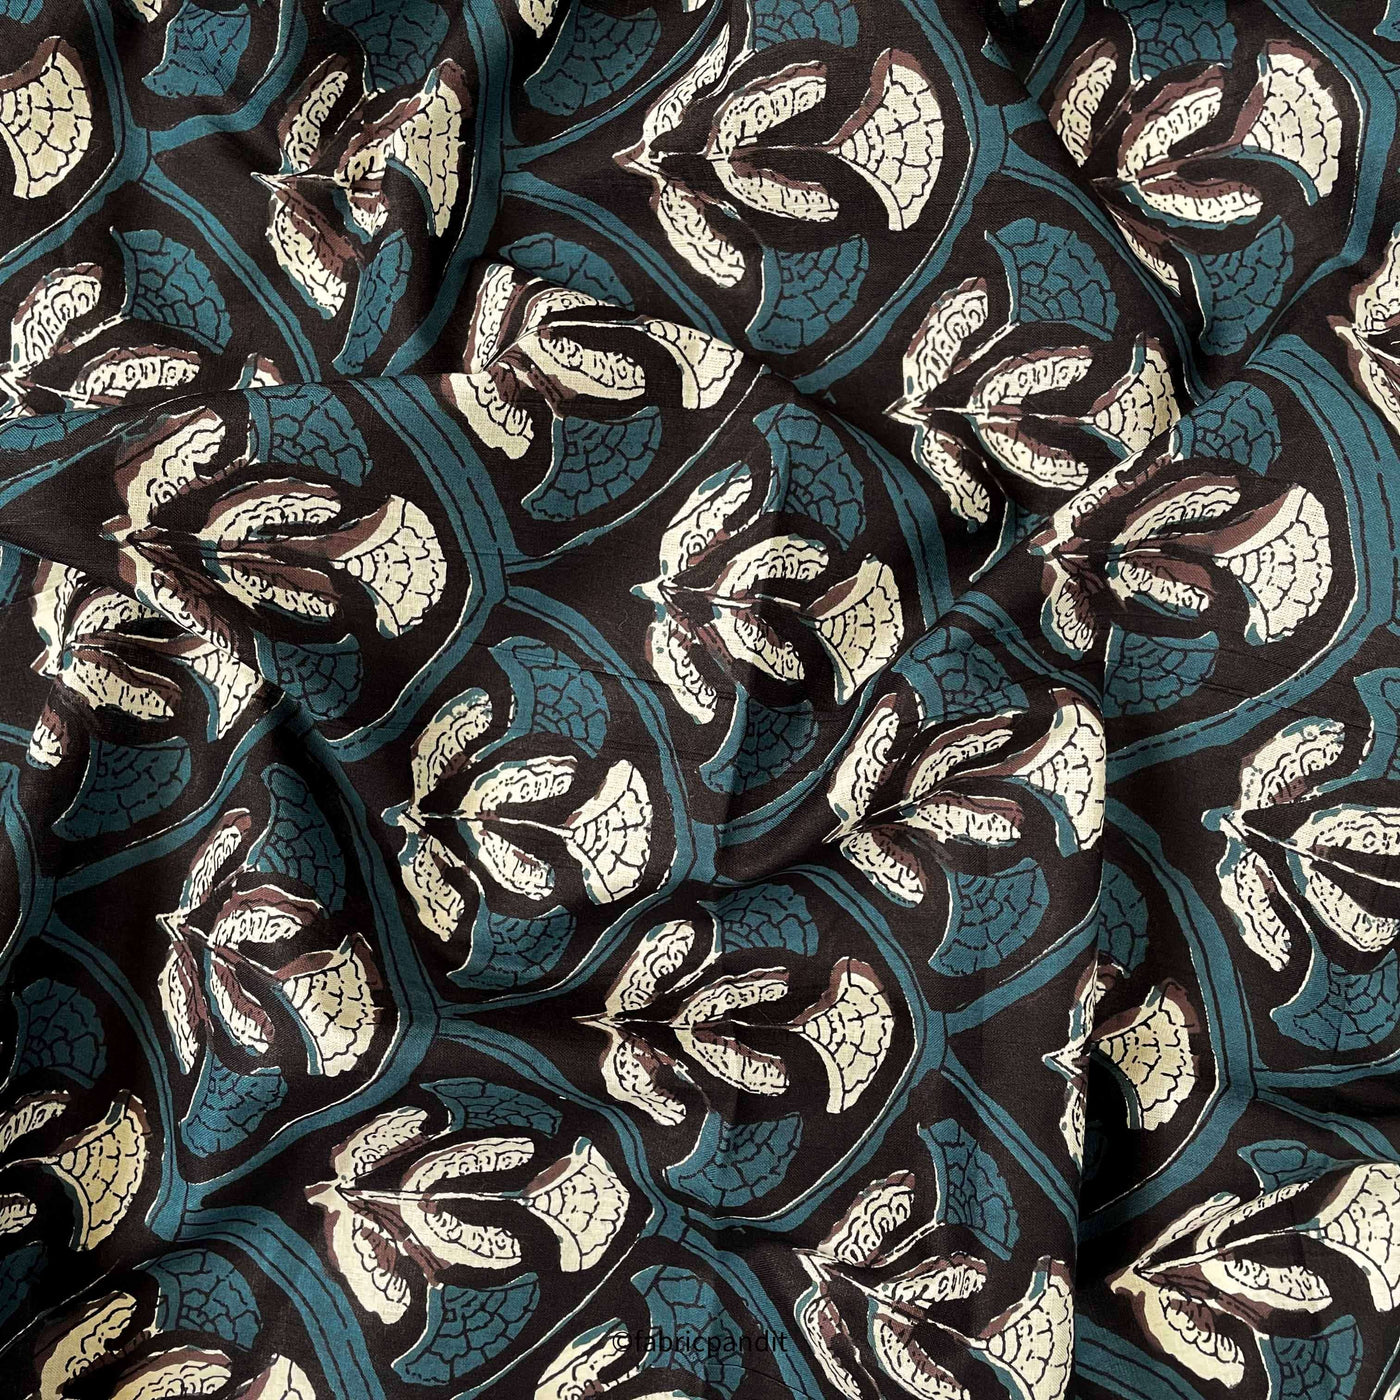 Fabric Pandit Fabric Black and Dusty Blue Egyptian Tulips Hand Block Printed Pure Cotton Modal Fabric (Width 42 inches)